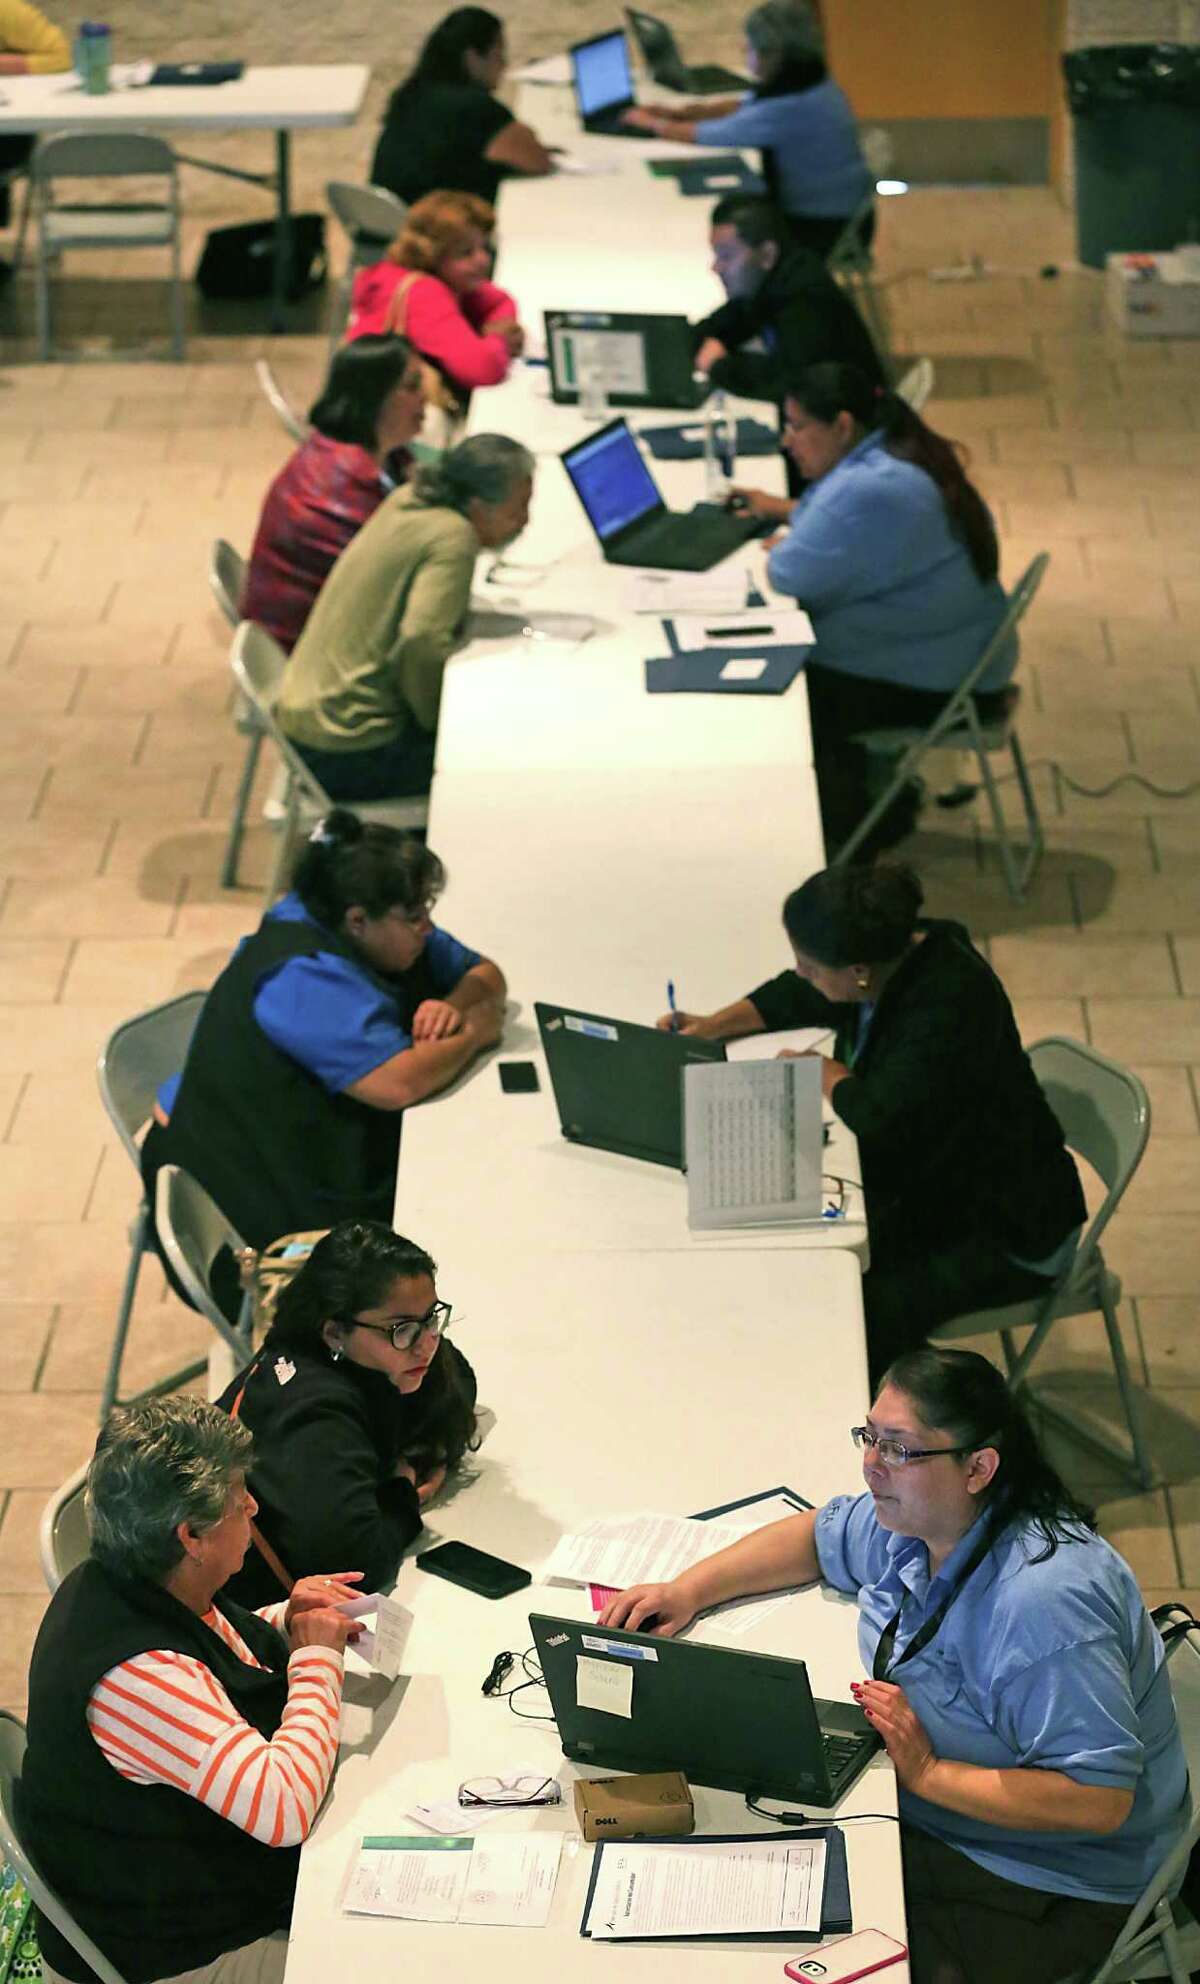 Assistors (right) help individuals enrolling in the 2016 health insurance plans through the Affordable Care Act, at Progreso Hall last month. In San Antonio, 101,863 people had signed up for 2016 health insurance plans on the federal exchange as of Jan. 9, according to the latest enrollment data released by the federal Centers for Medicare and Medicaid Services.